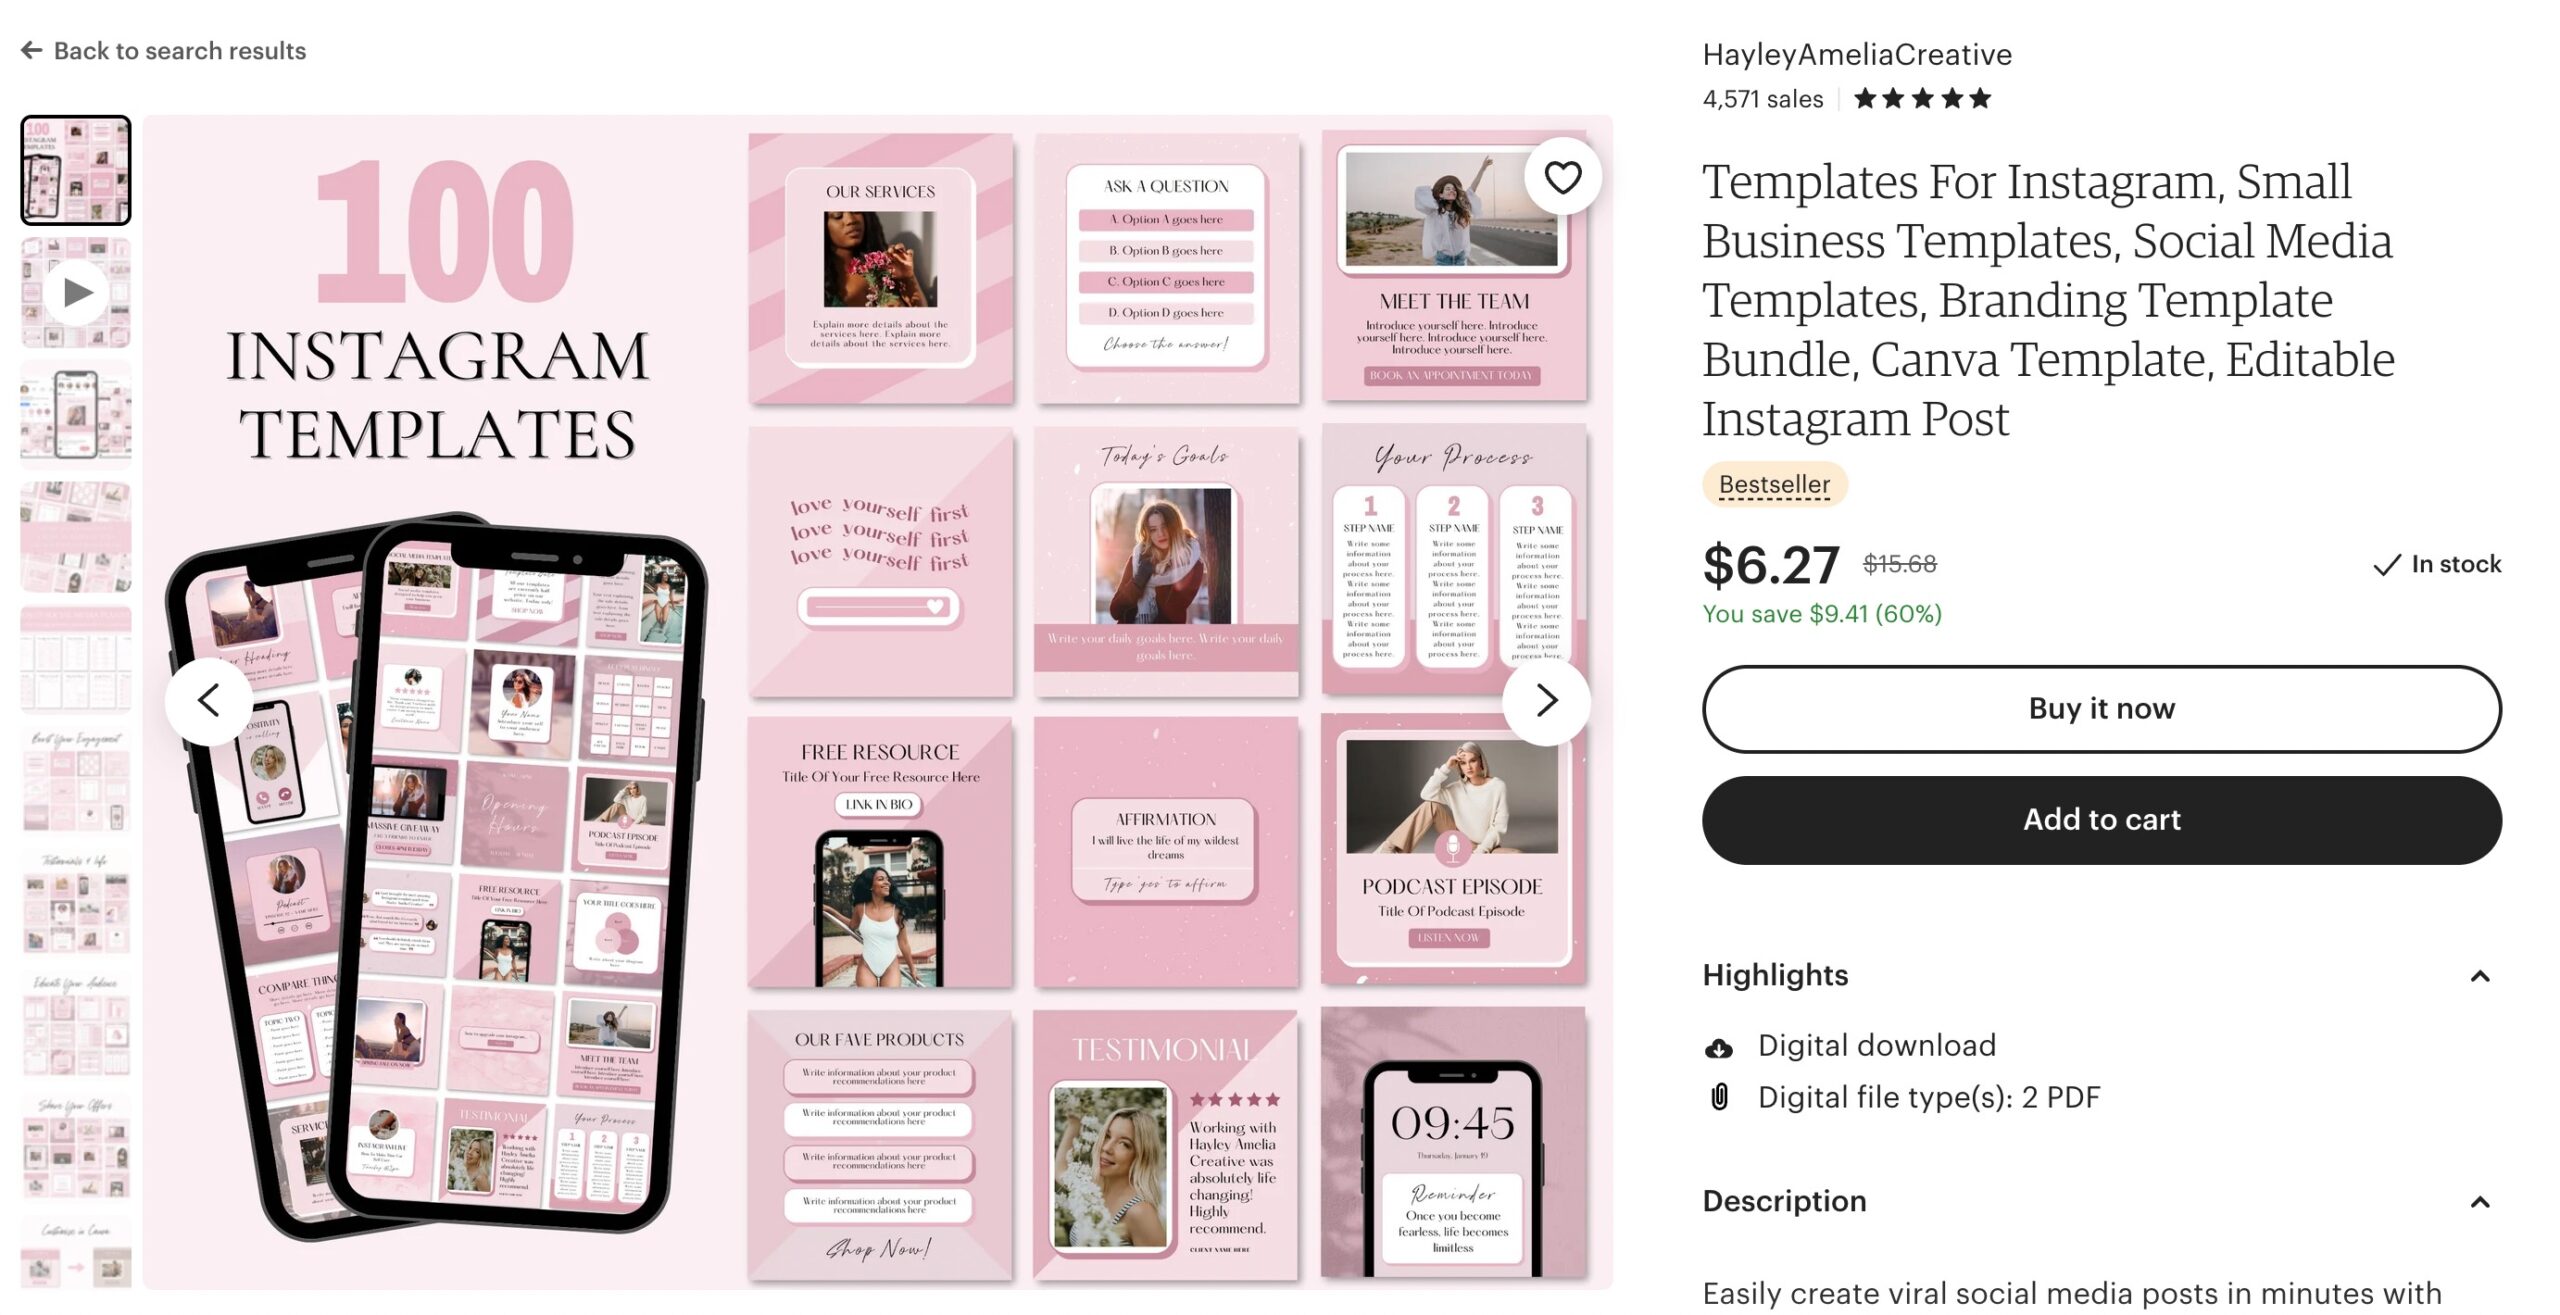 Templates for Instagram Etsy Printables